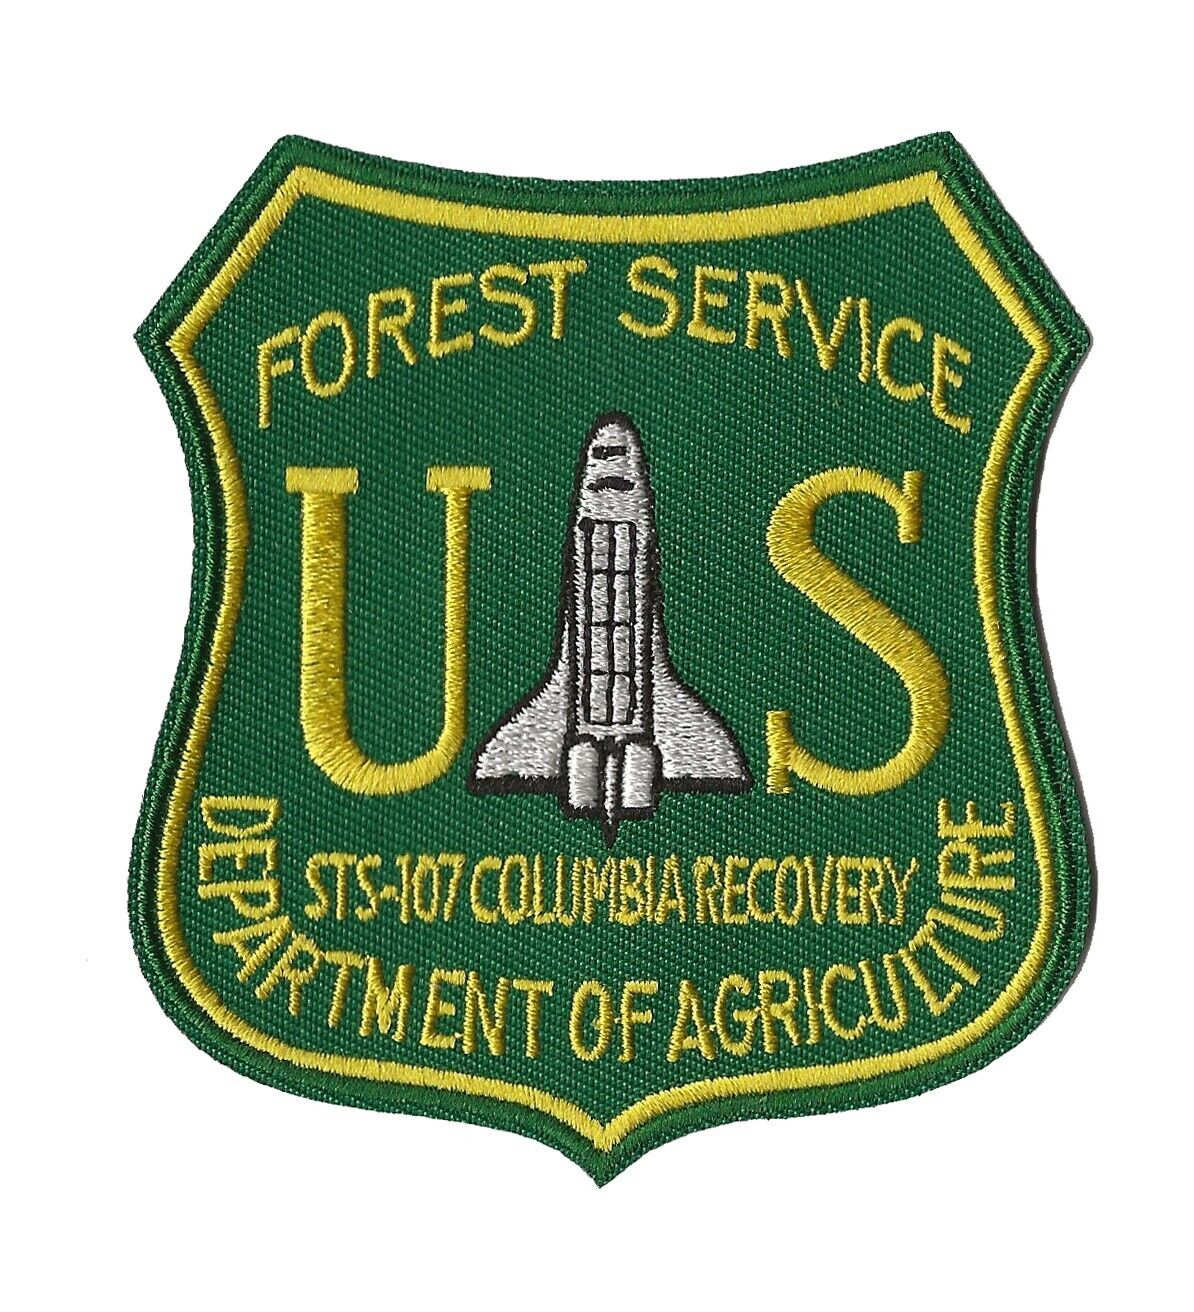 STS-107 NASA space shuttle Columbia US Forest Service recovery patch USFS